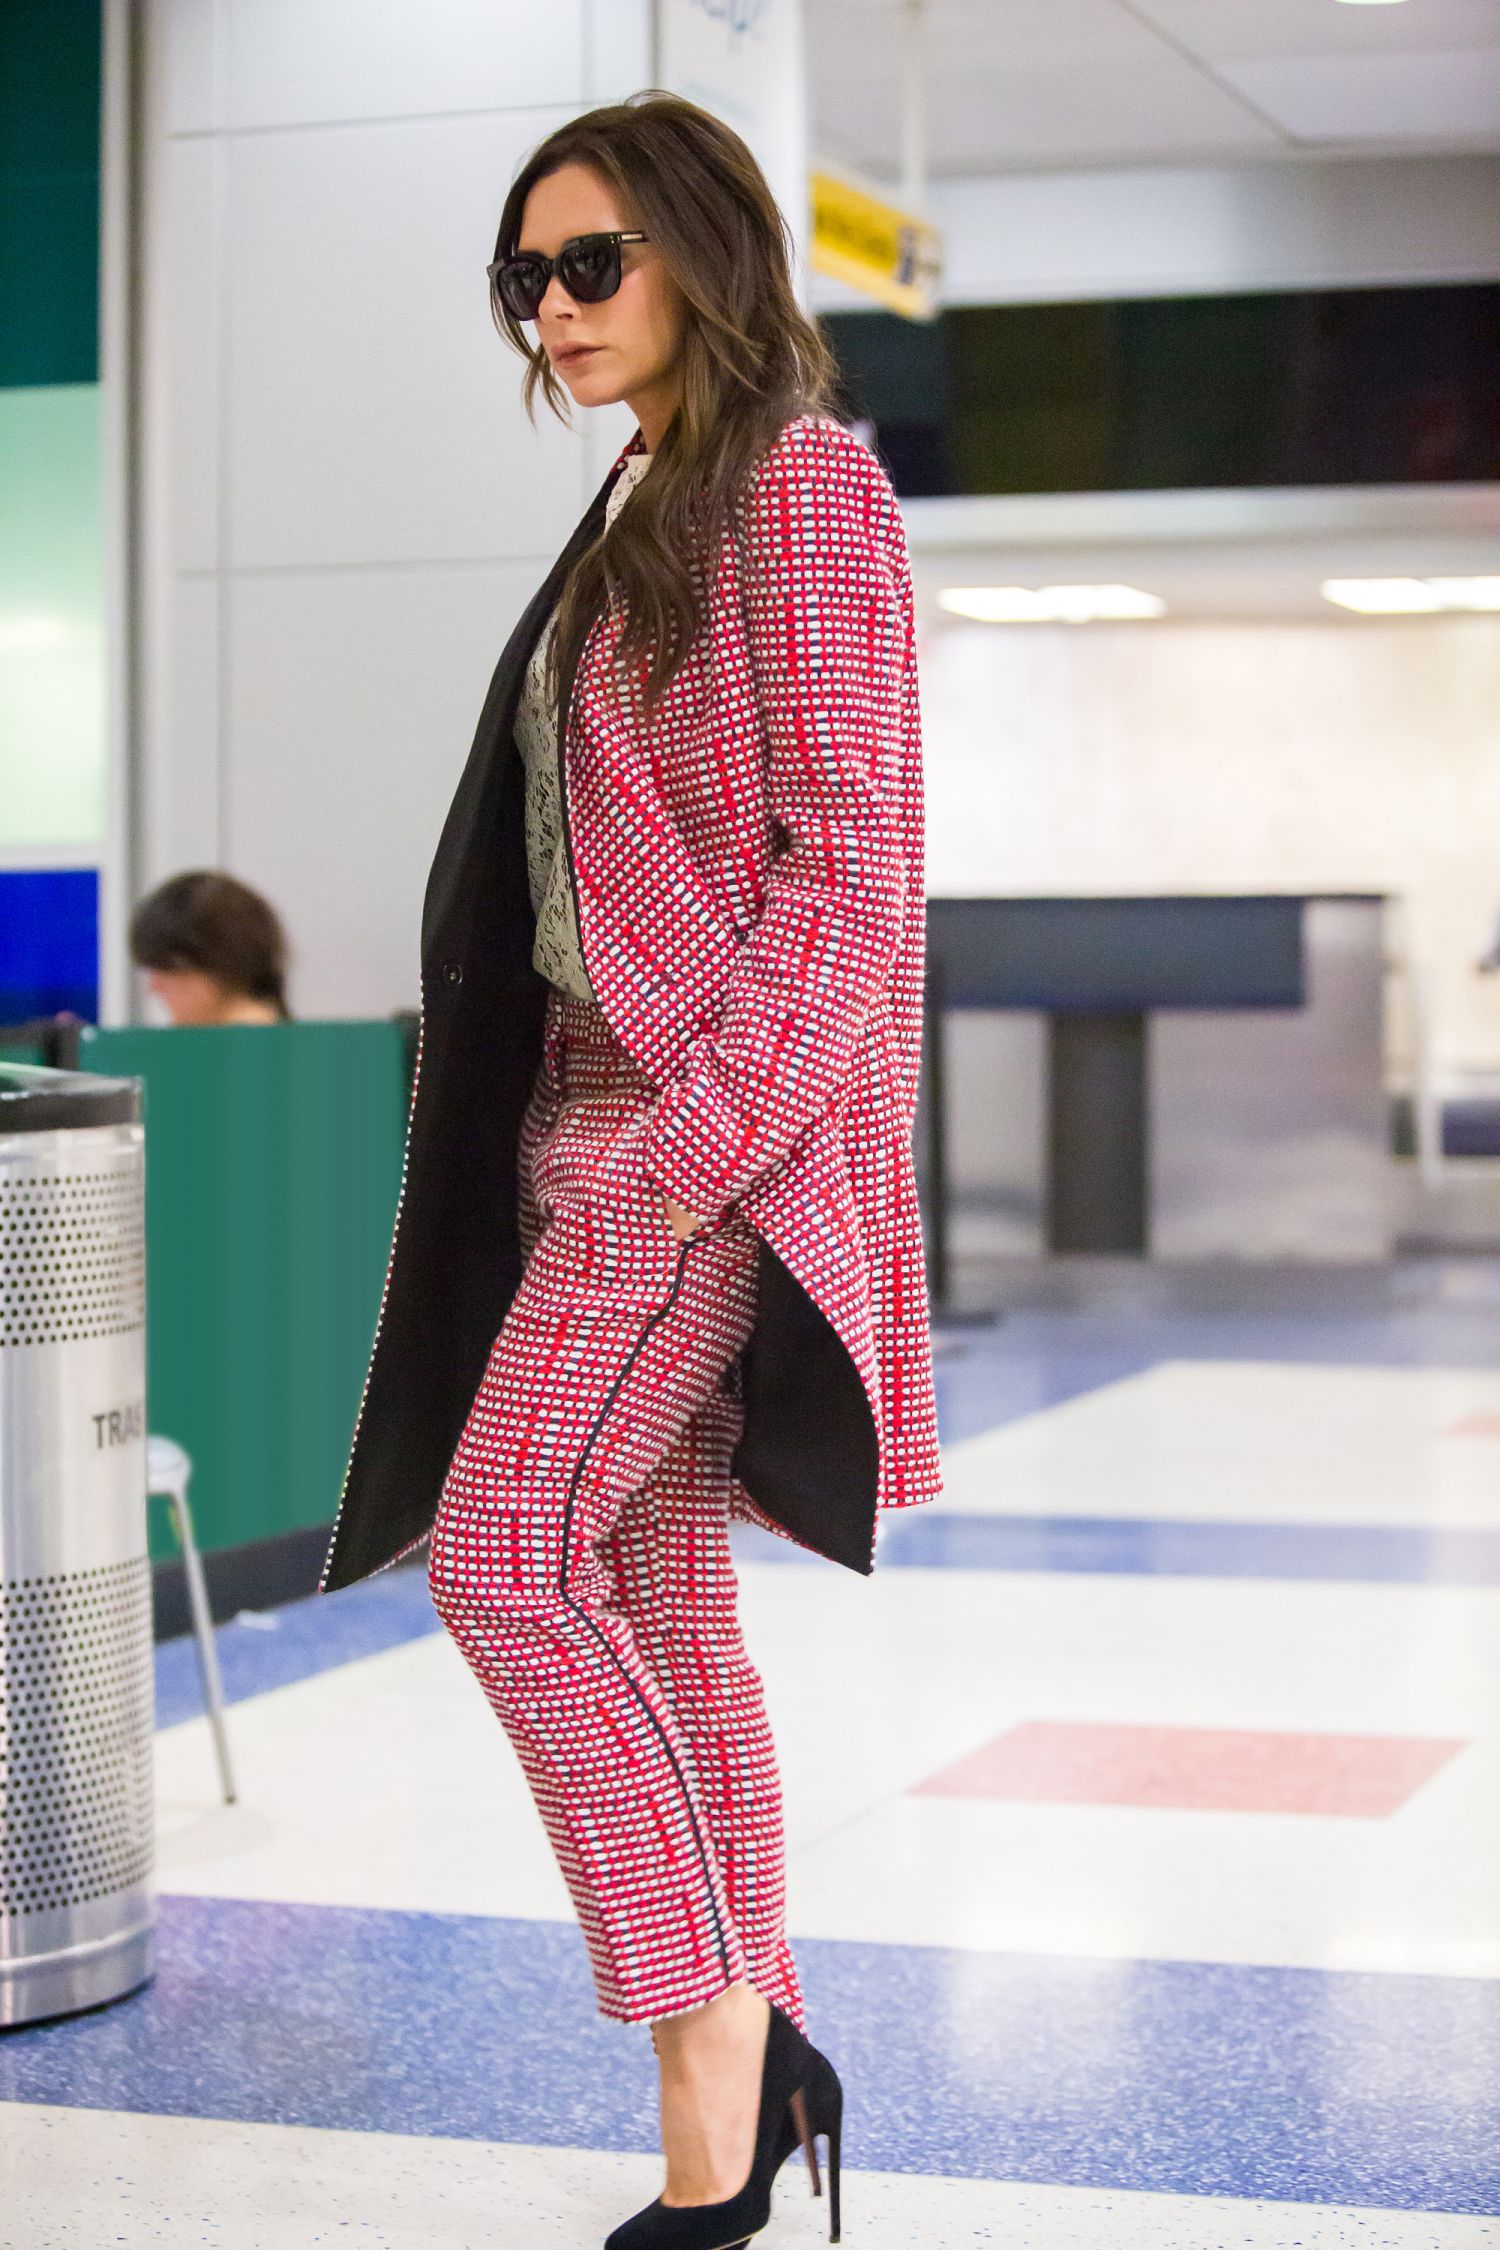 NEW YORK, NY - MAY 31: Victoria Beckham is seen arriving at JFK Airport on May 31, 2015 in New York City. (Photo by Alessio Botticelli/GC Images)